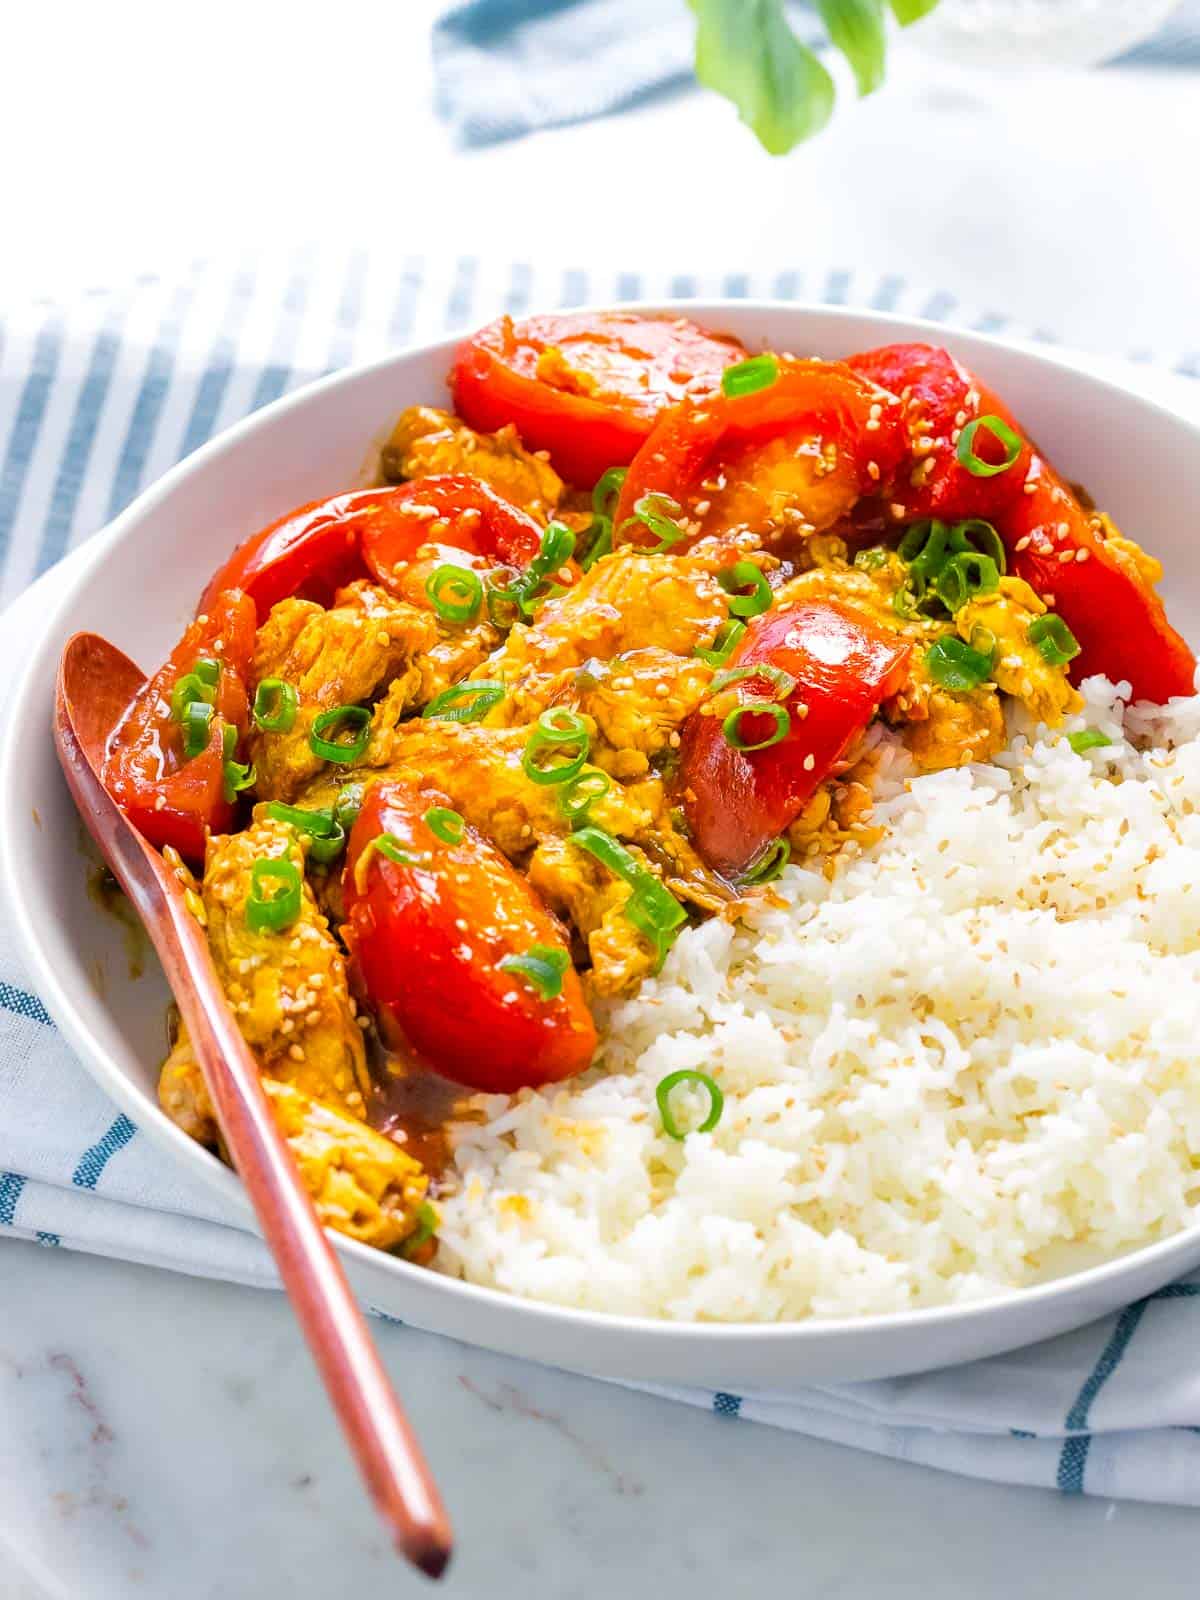 Chinese tomato egg stir fry with rice and spoon.